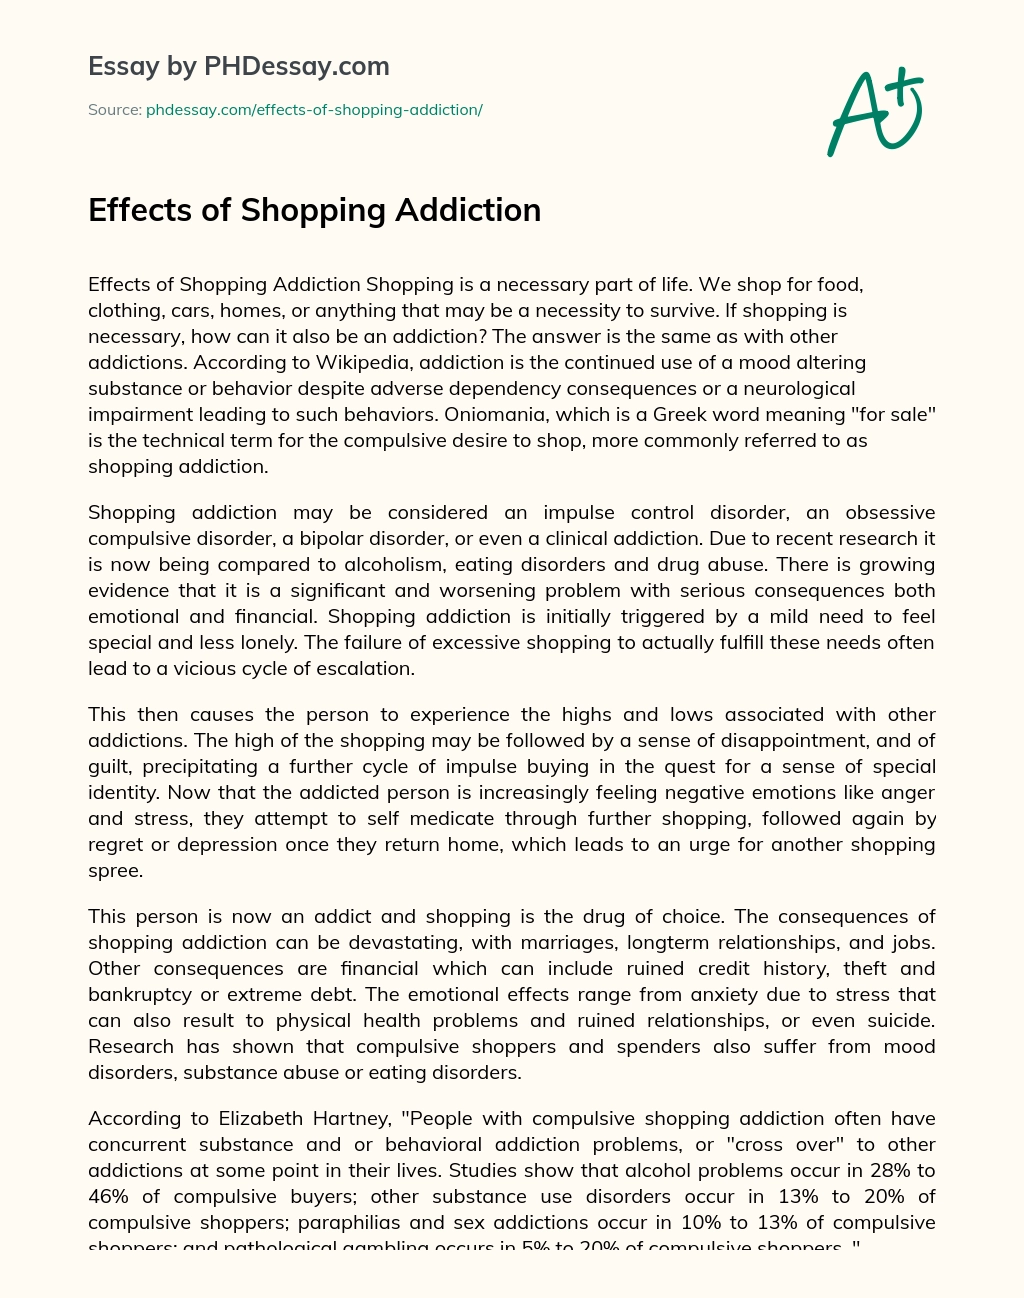 Effects of Shopping Addiction essay